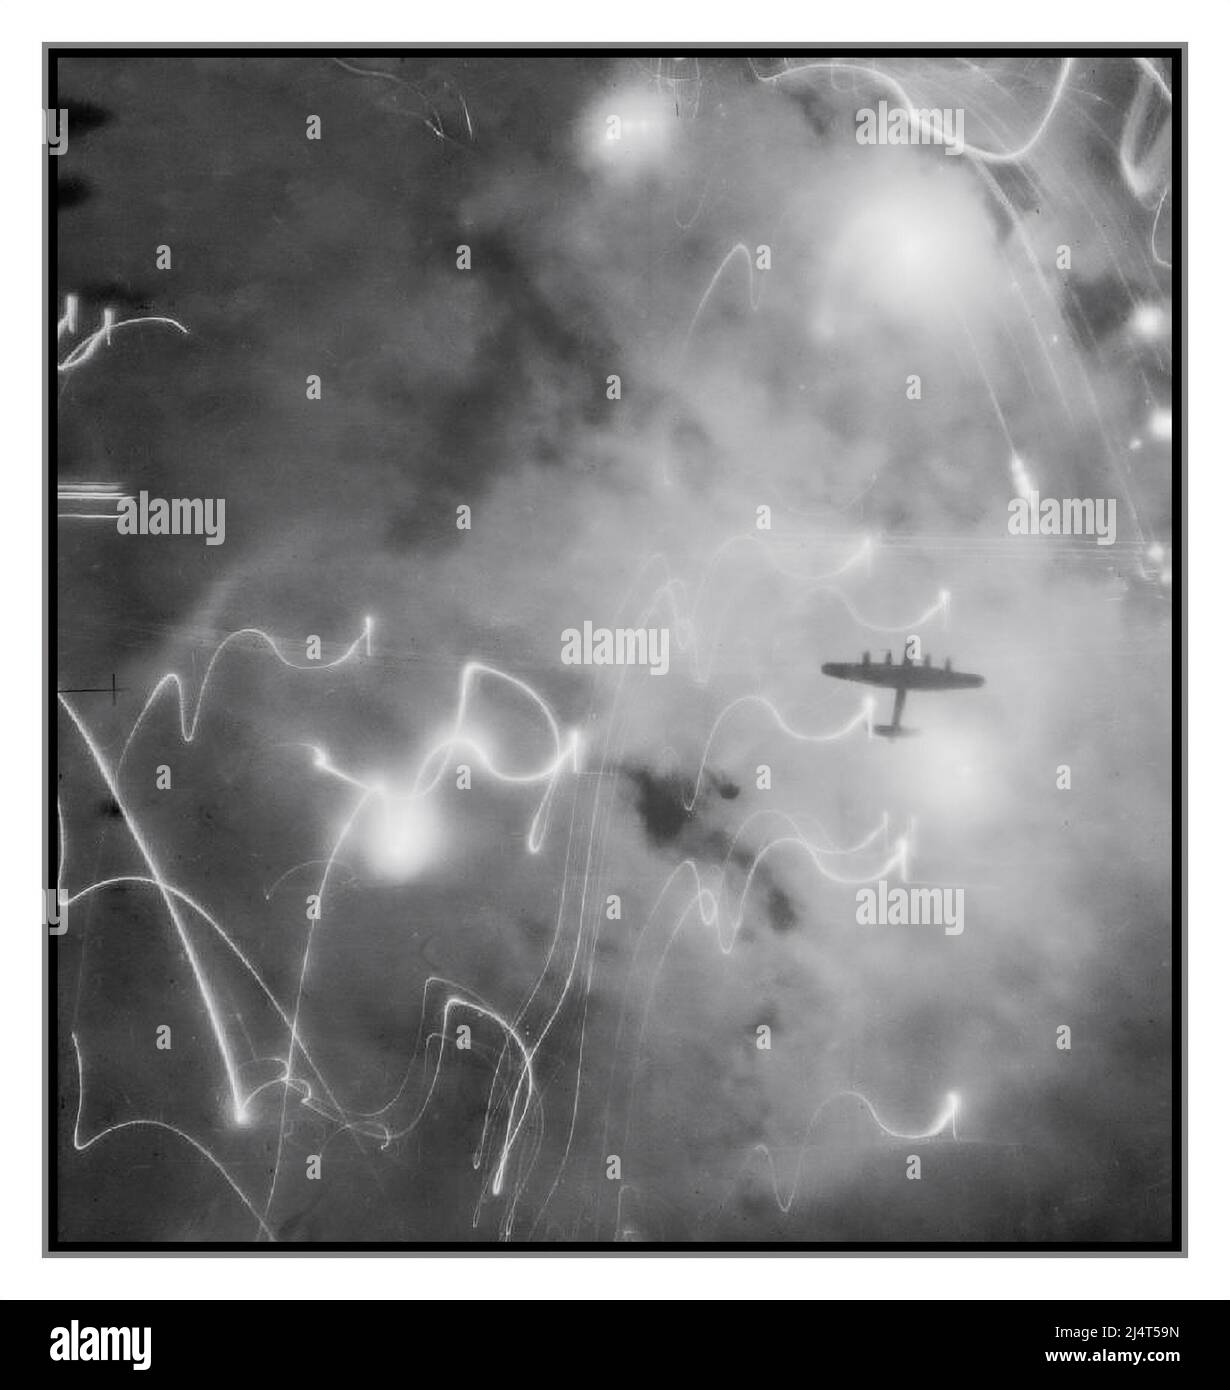 BOMBING RUN NIGHT WW2 HAMBURG Remarkable reconnaissance image illustrating the chaos of flares and enemy fire with Allied bombing runs over Nazi Germany An Avro Lancaster of No. 1 Group Bomber Command, silhouetted against flares, smoke and explosions during the attack on Hamburg, Germany, by aircraft of Nos. 1, 5 and 8 Groups on the night of 30/31 January 1943. This raid was the first occasion on which H2S centimetric radar was used by the Pathfinder aircraft to navigate the bombing run. Lest we forget the bravery and huge sacrifice of RAF British Bomber Command Crews.... Stock Photo